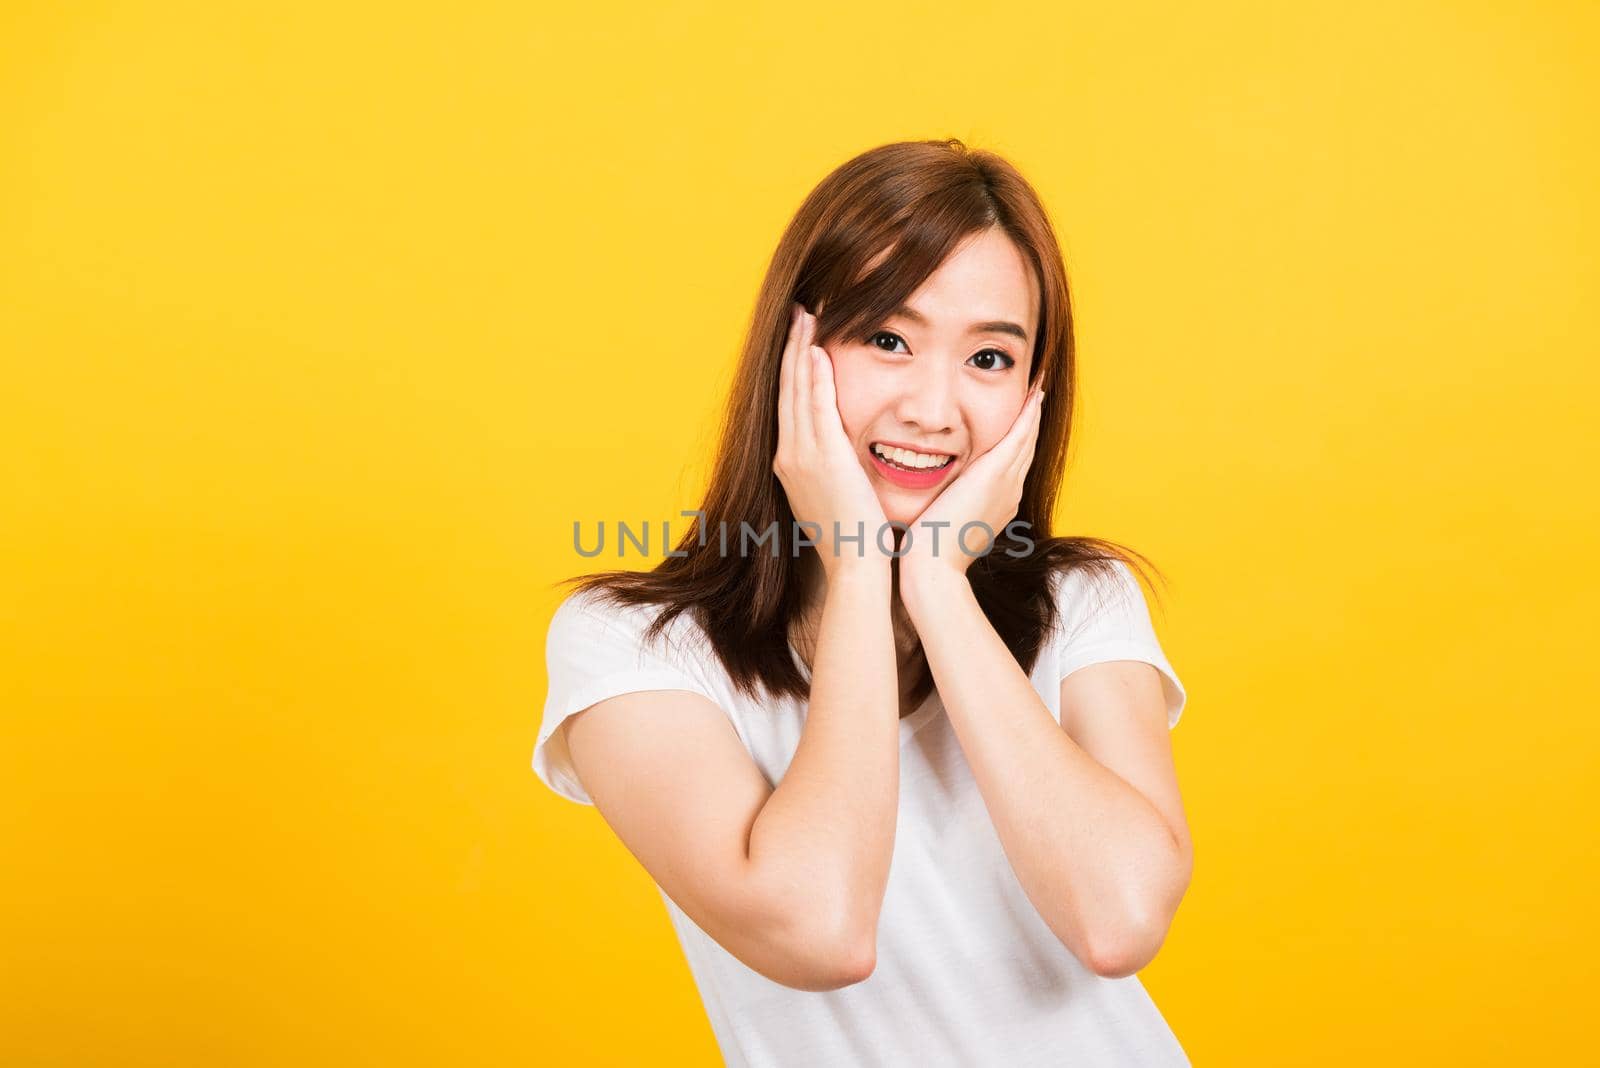 woman teen stand surprised excited celebrating open mouth gesturing palms on face by Sorapop